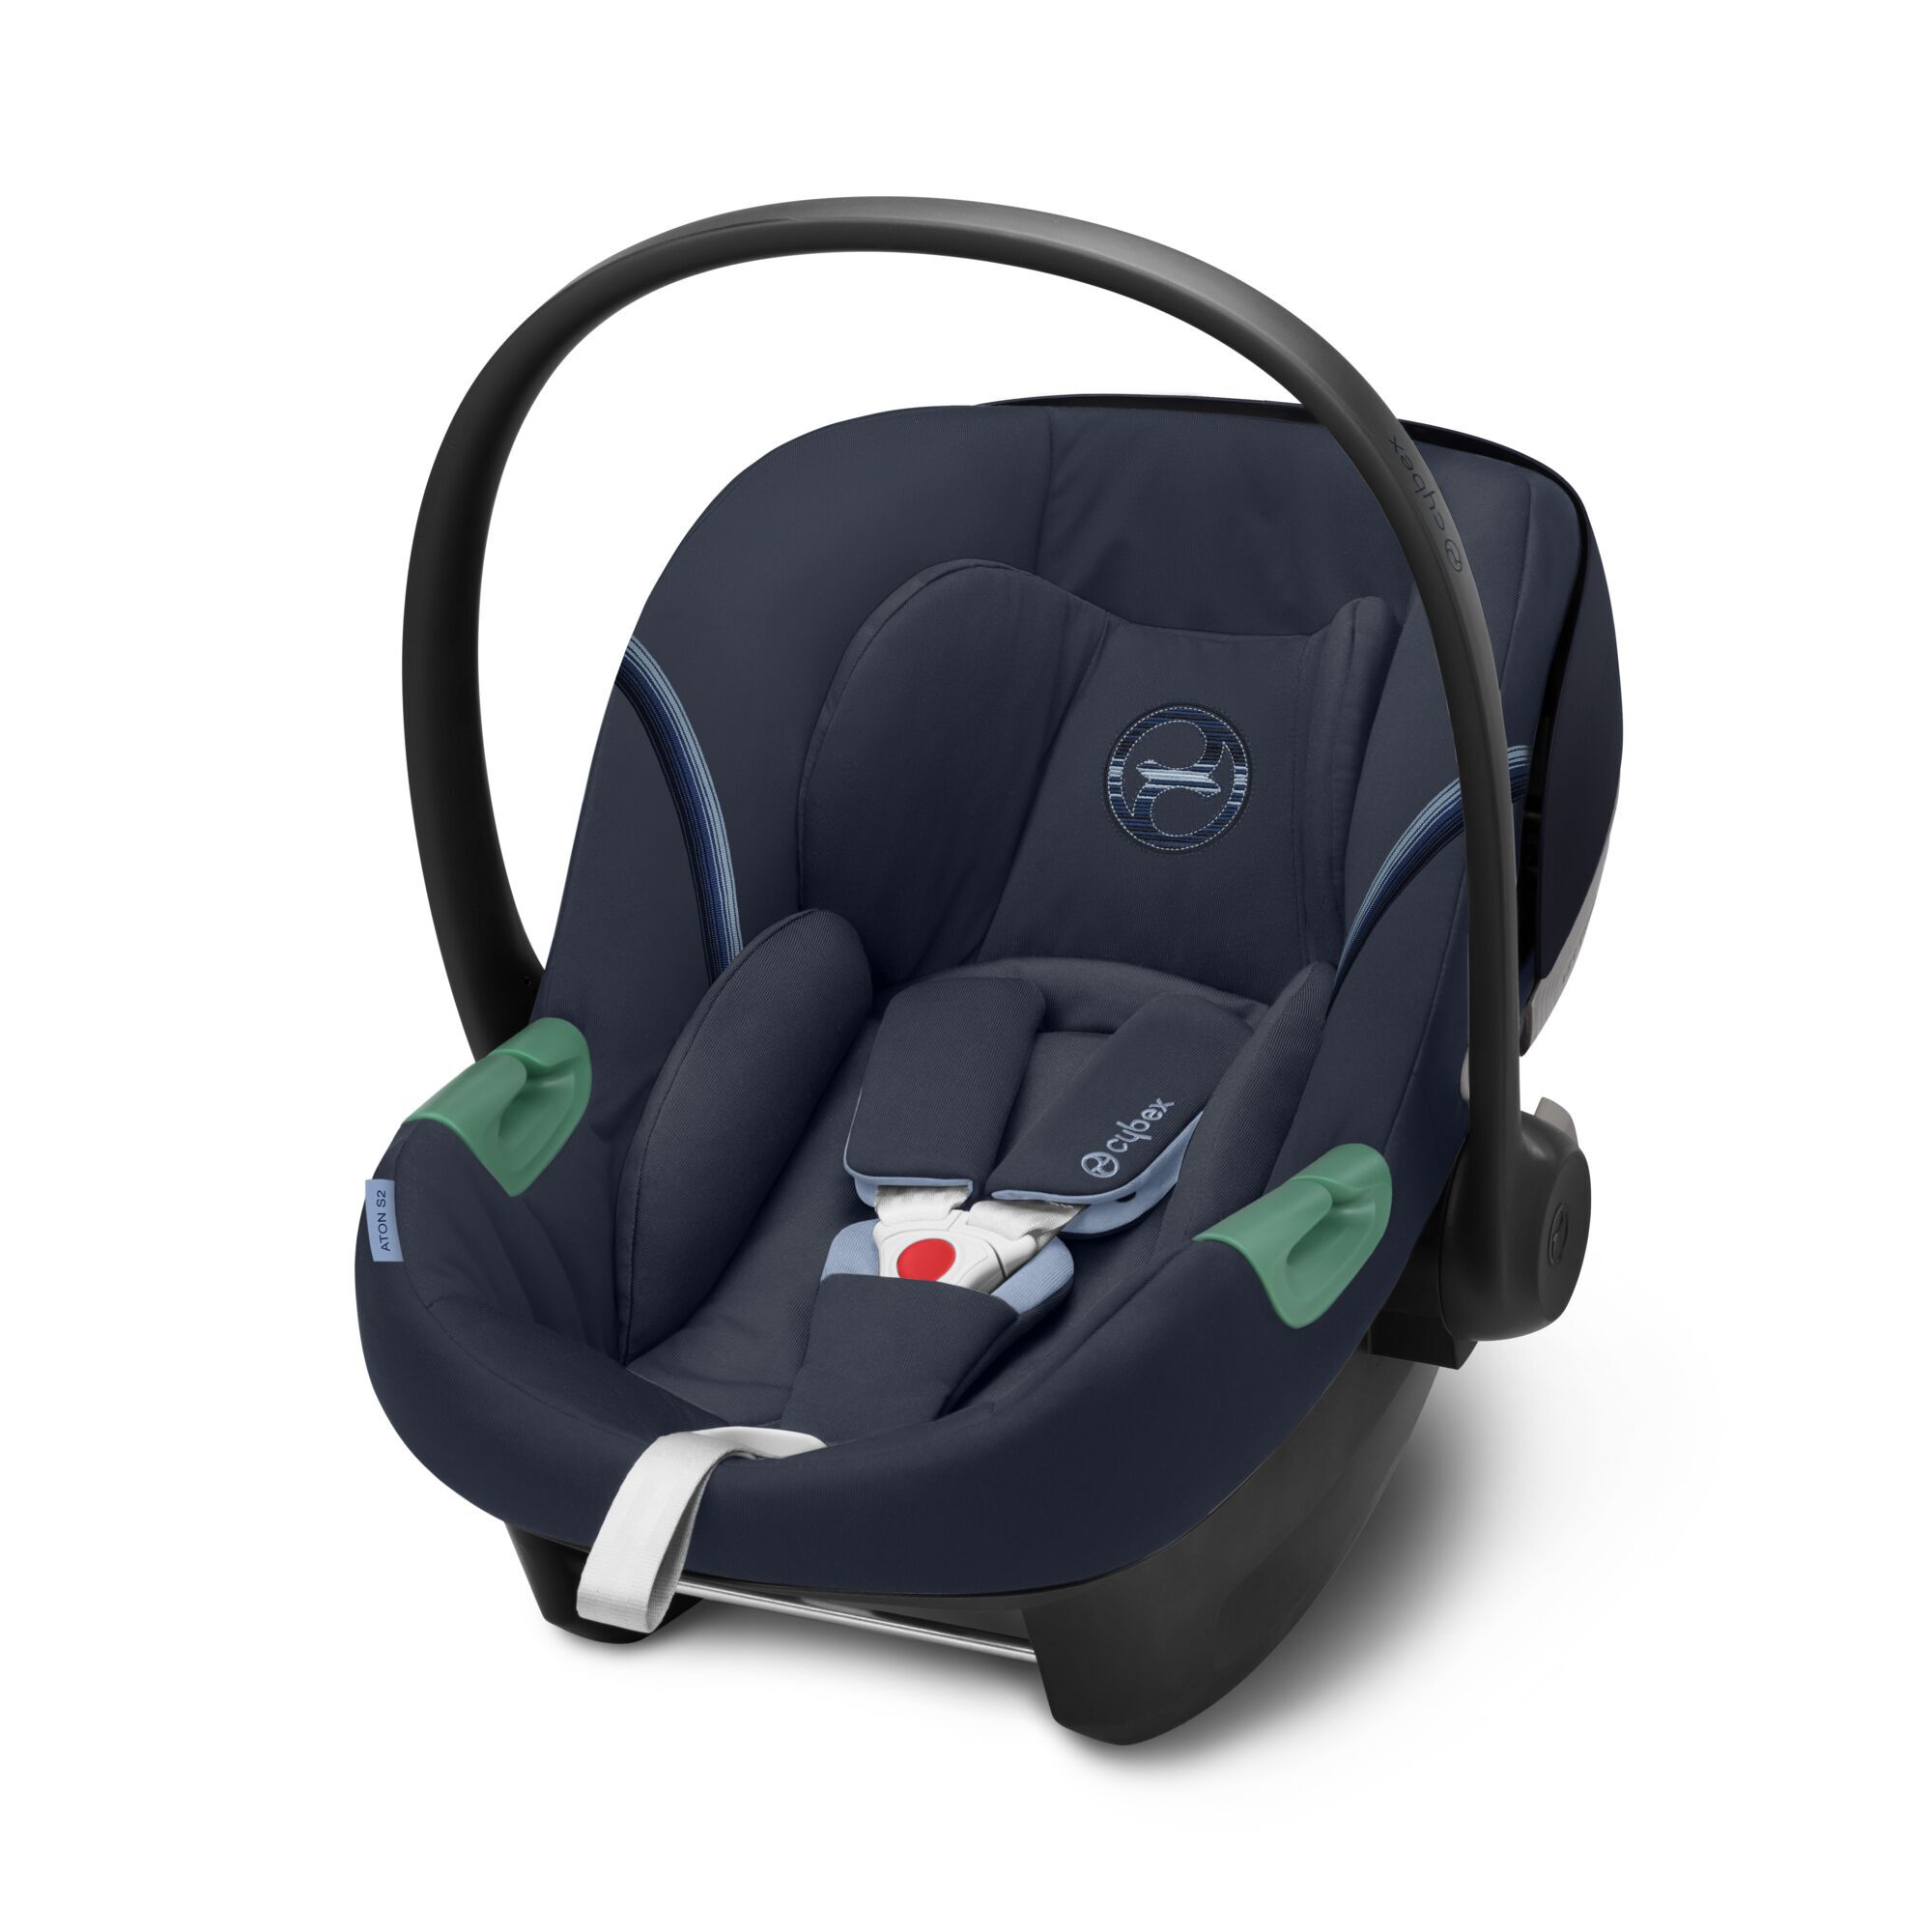 Newborn Insert Incl Birth to Approx 18 months navy blue Max 13 kg CYBEX Gold Baby Car Seat Aton 5 